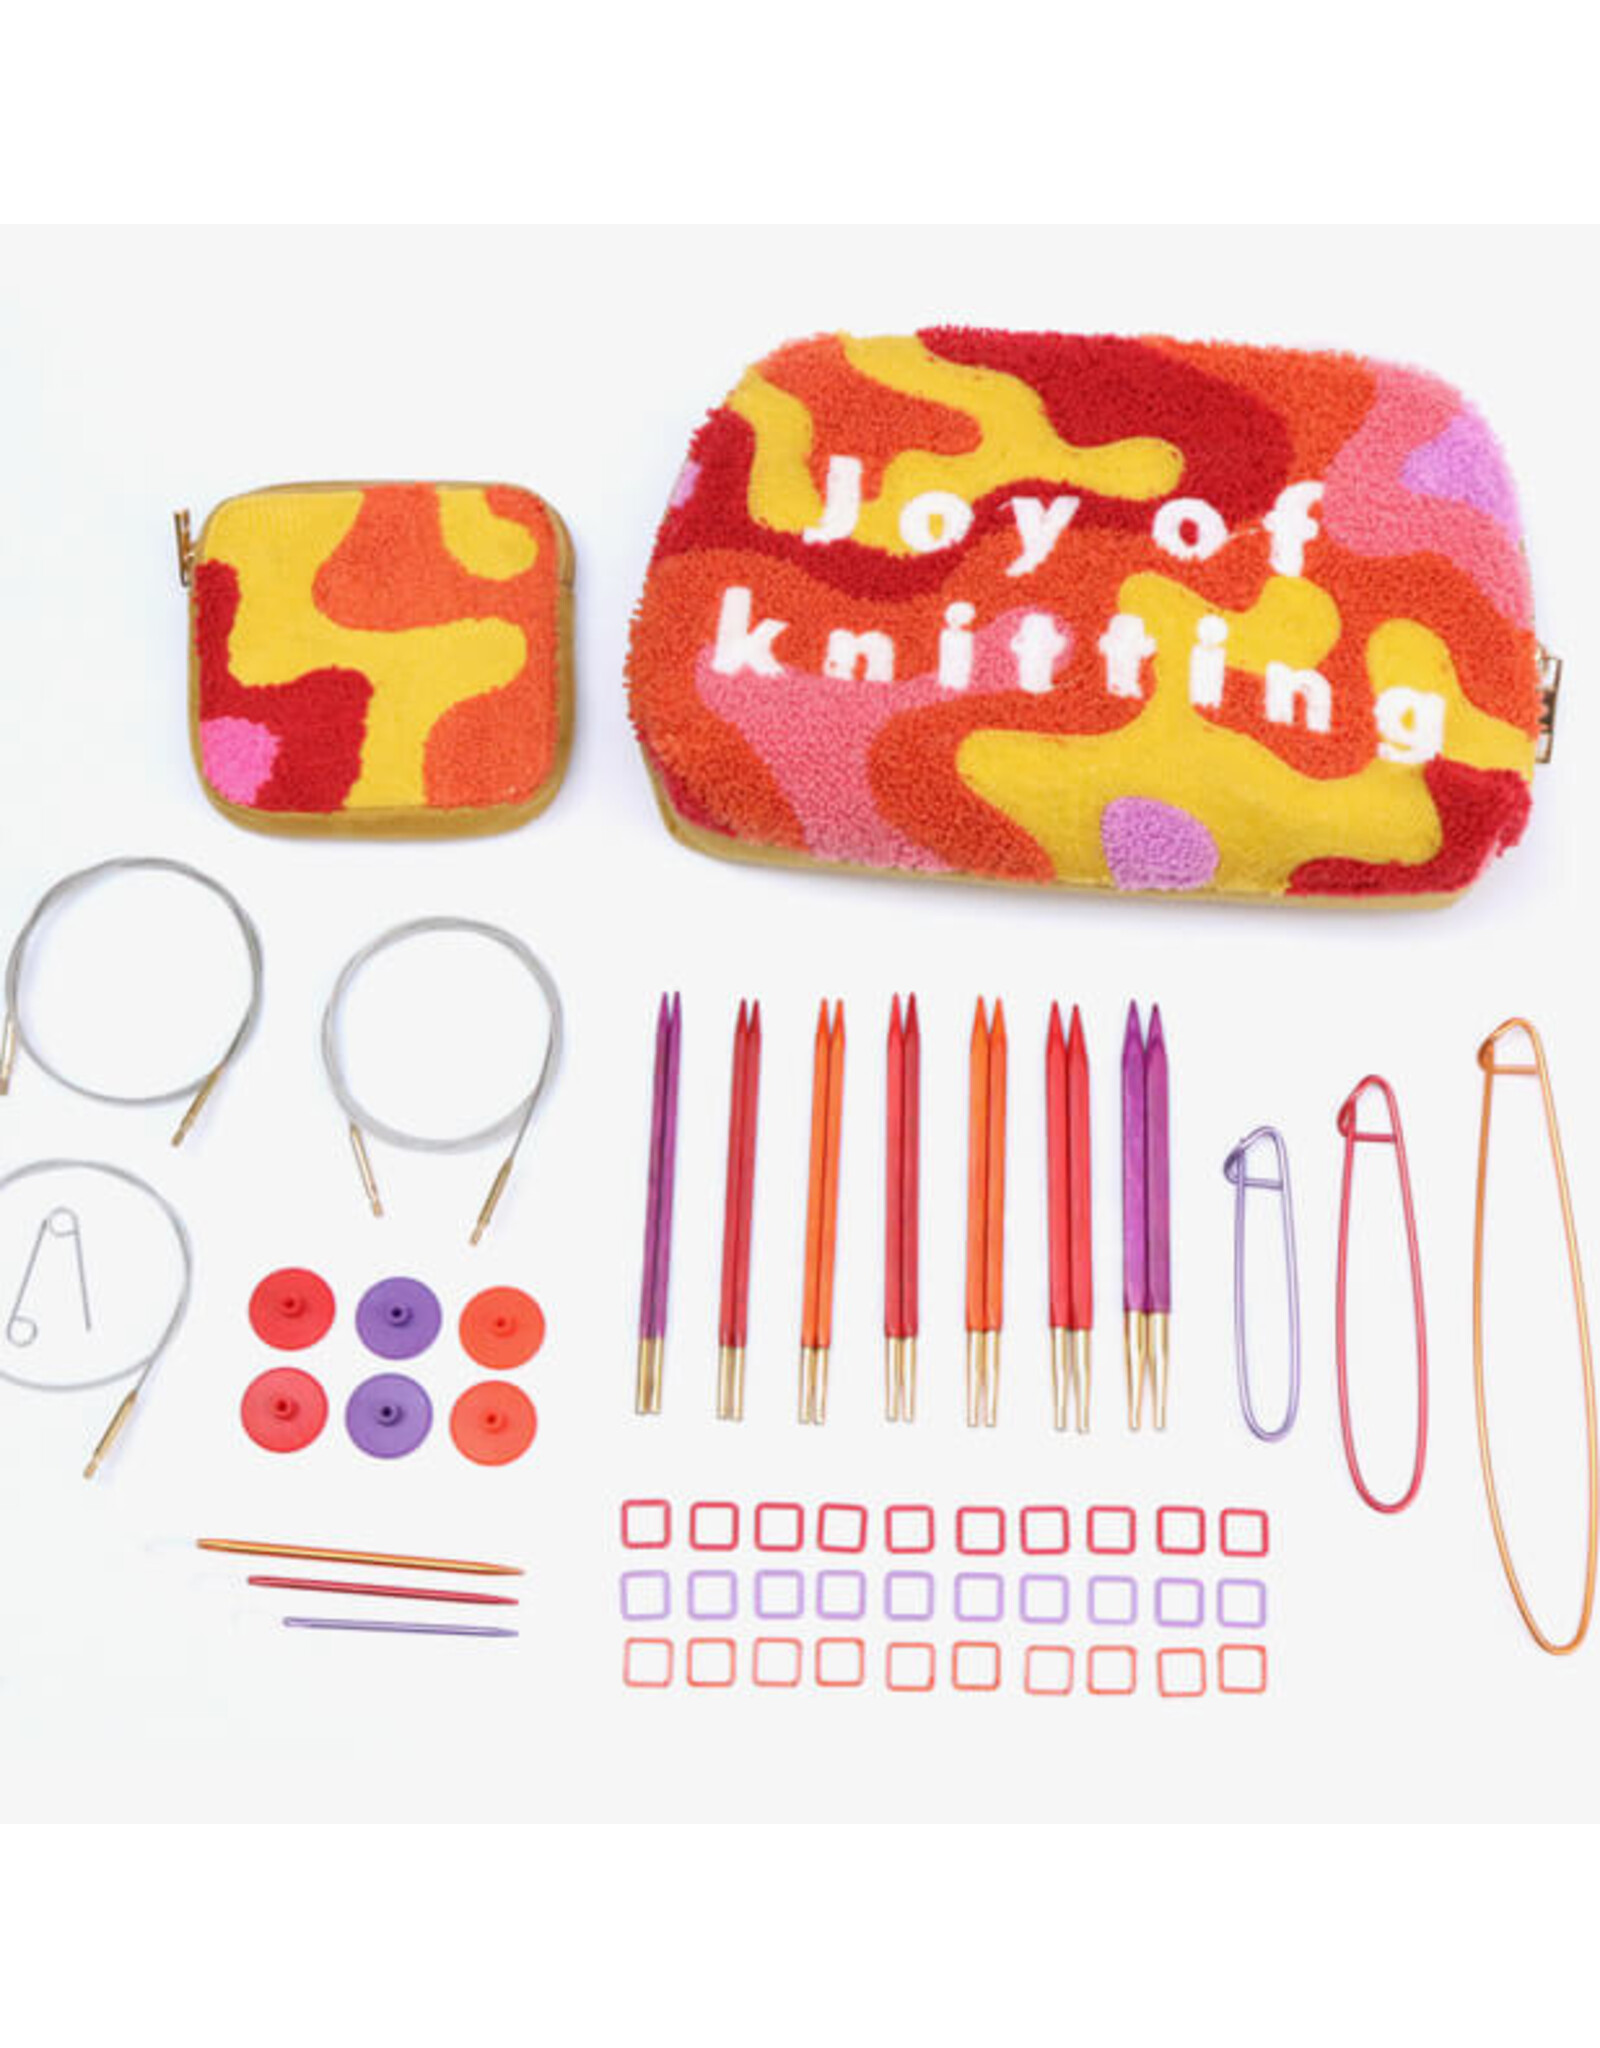 Set with Hand-sewing needlesand needle grippers